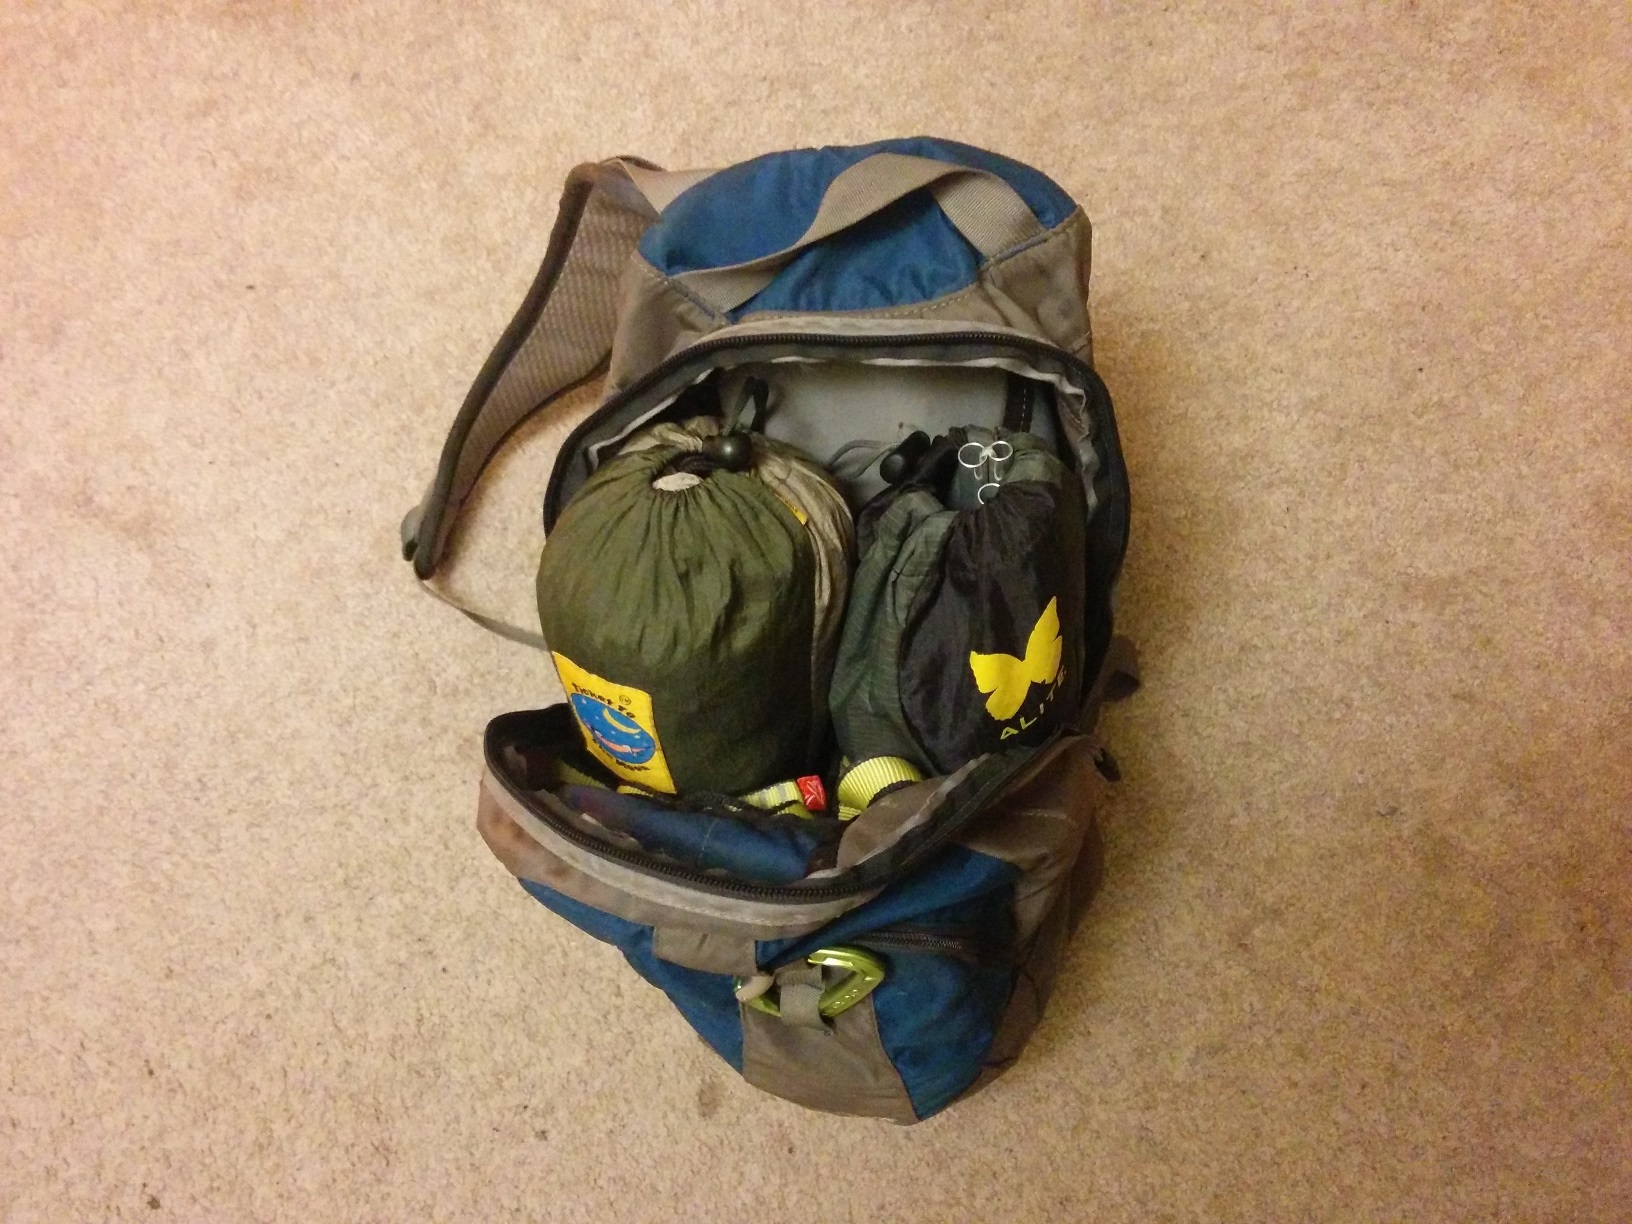 The backpack standing up and open, showing the contents stuffed inside.